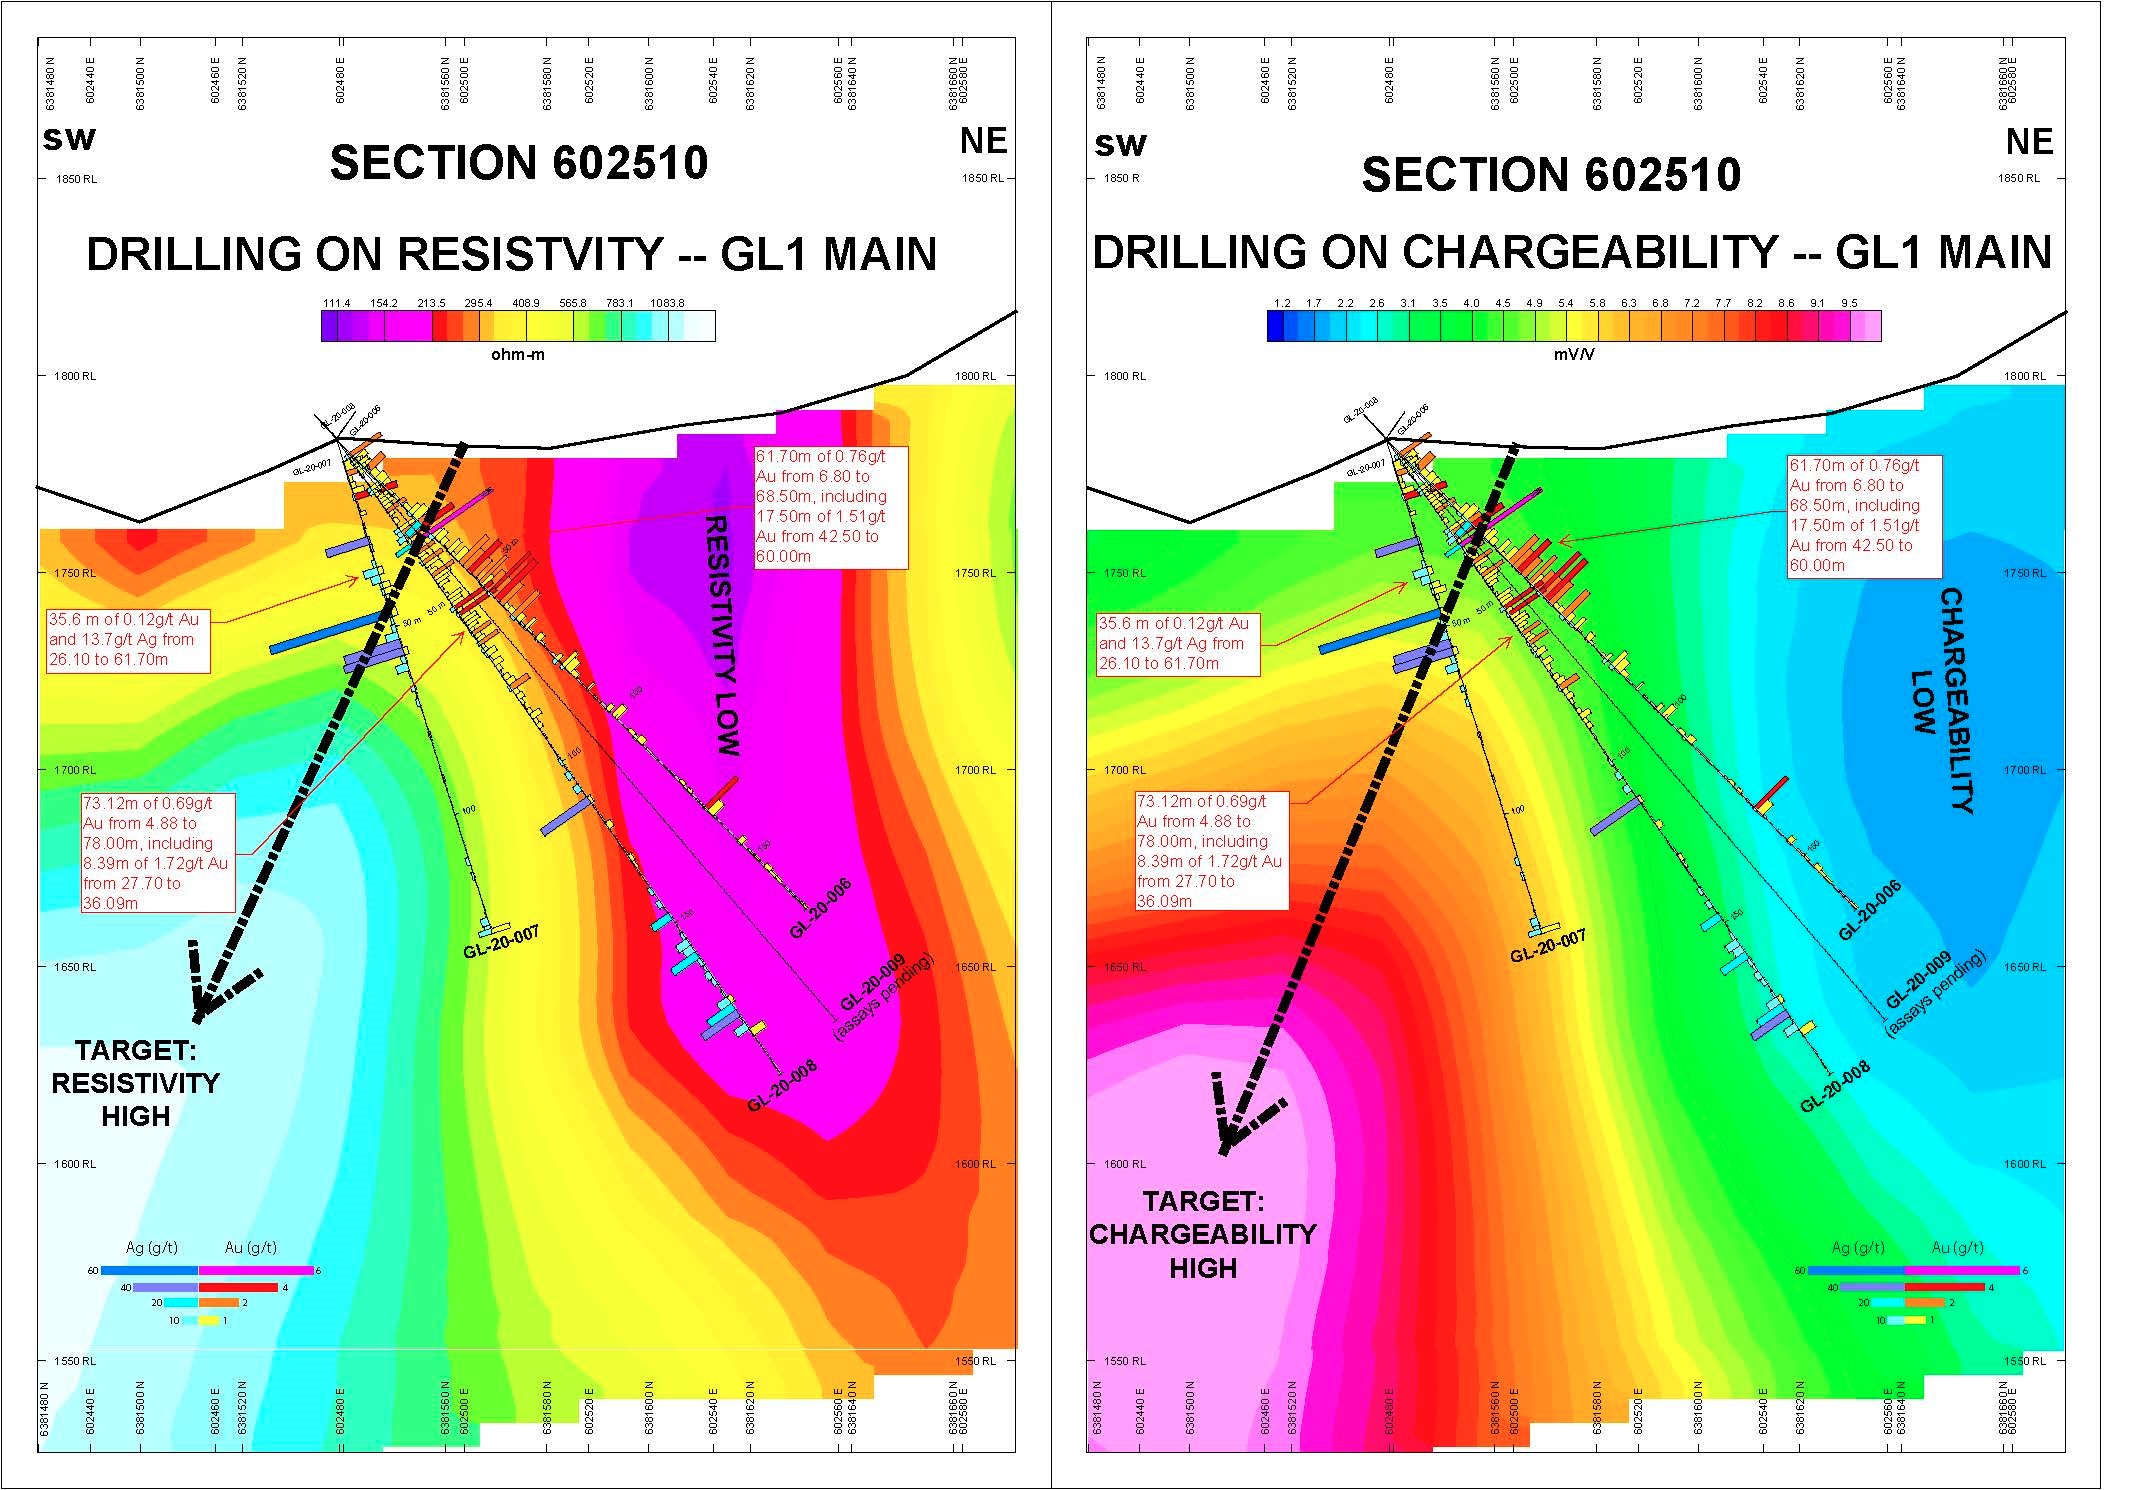 Section 602510, Drilling on Resistivity and Chargeability, GL1 Main Zone